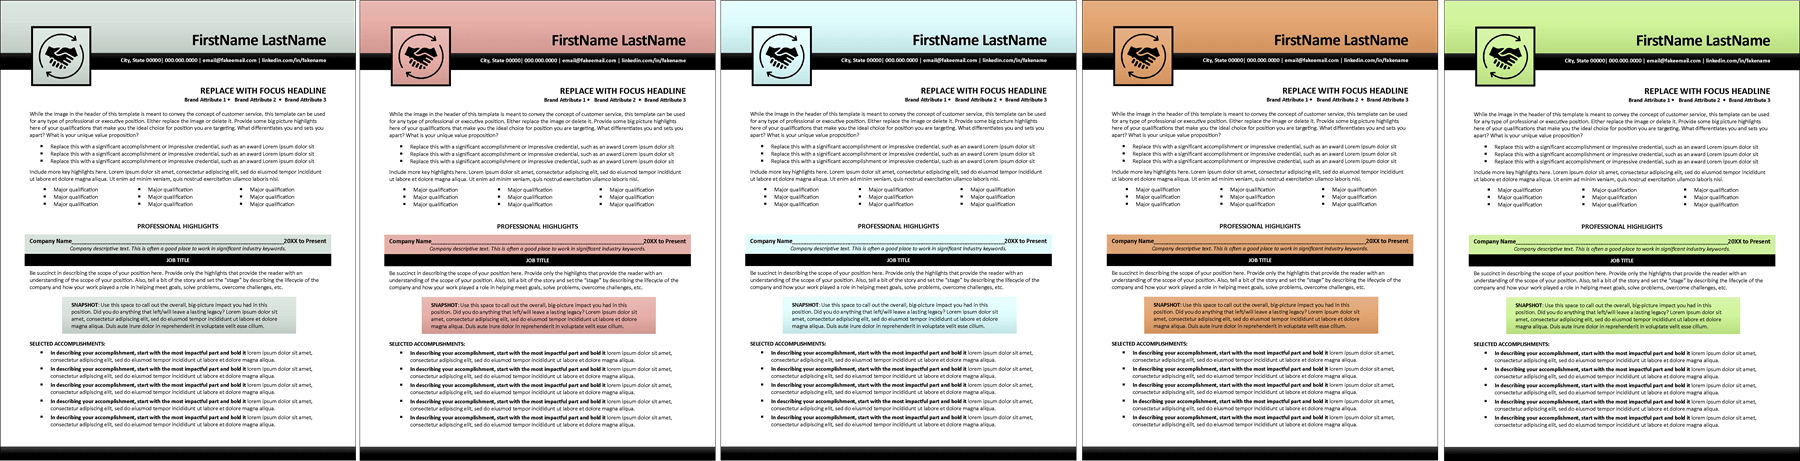 Customer Service Resume Color Options